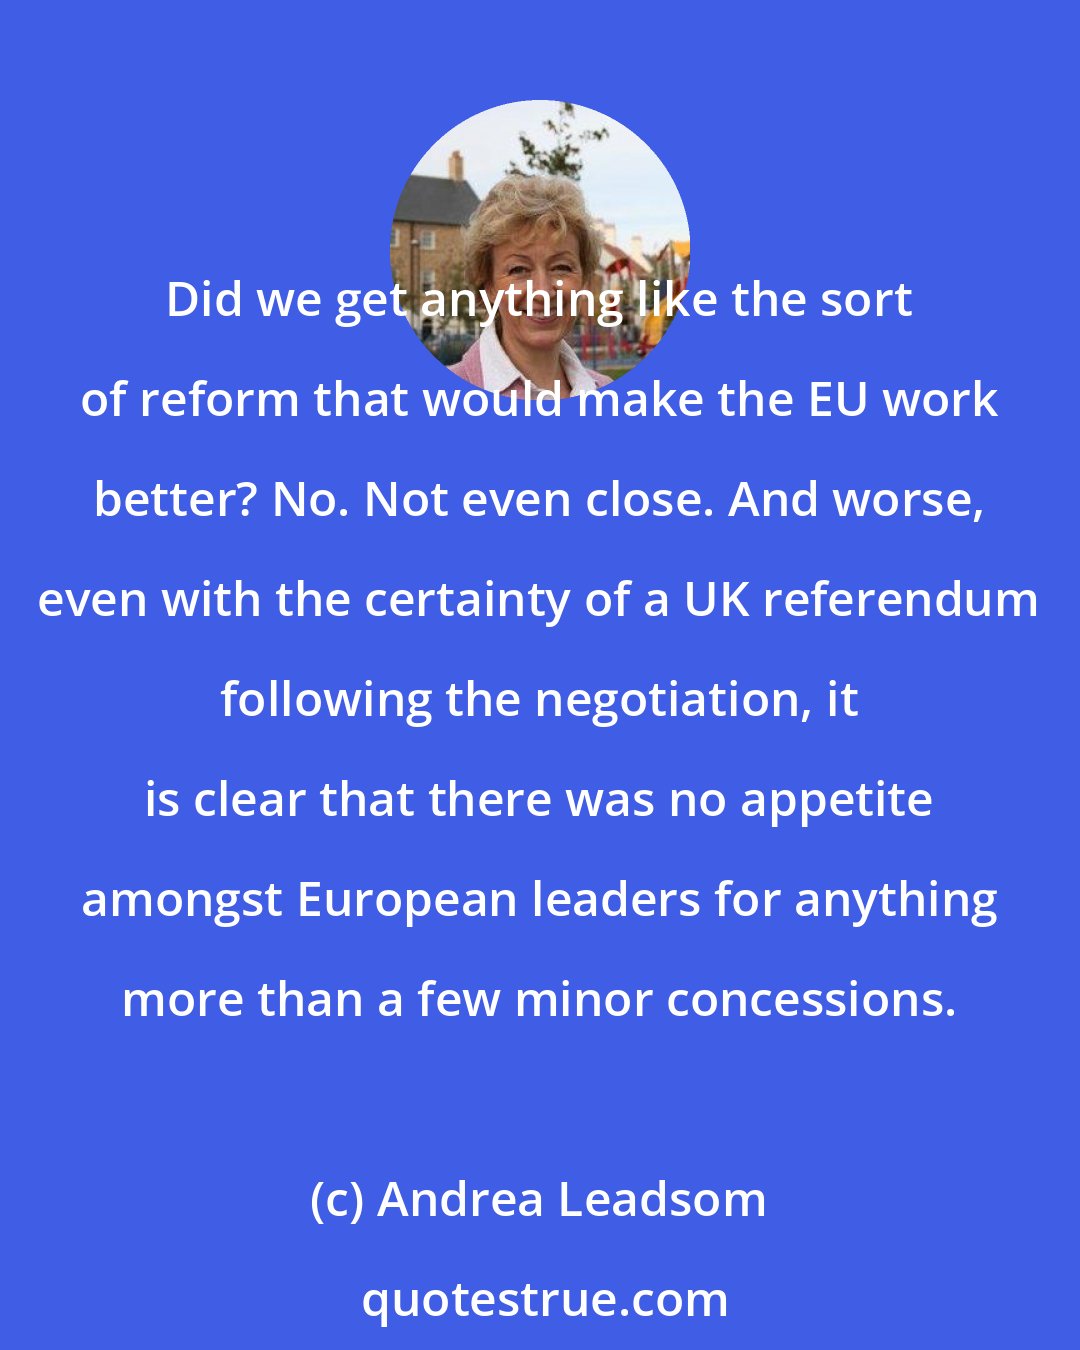 Andrea Leadsom: Did we get anything like the sort of reform that would make the EU work better? No. Not even close. And worse, even with the certainty of a UK referendum following the negotiation, it is clear that there was no appetite amongst European leaders for anything more than a few minor concessions.